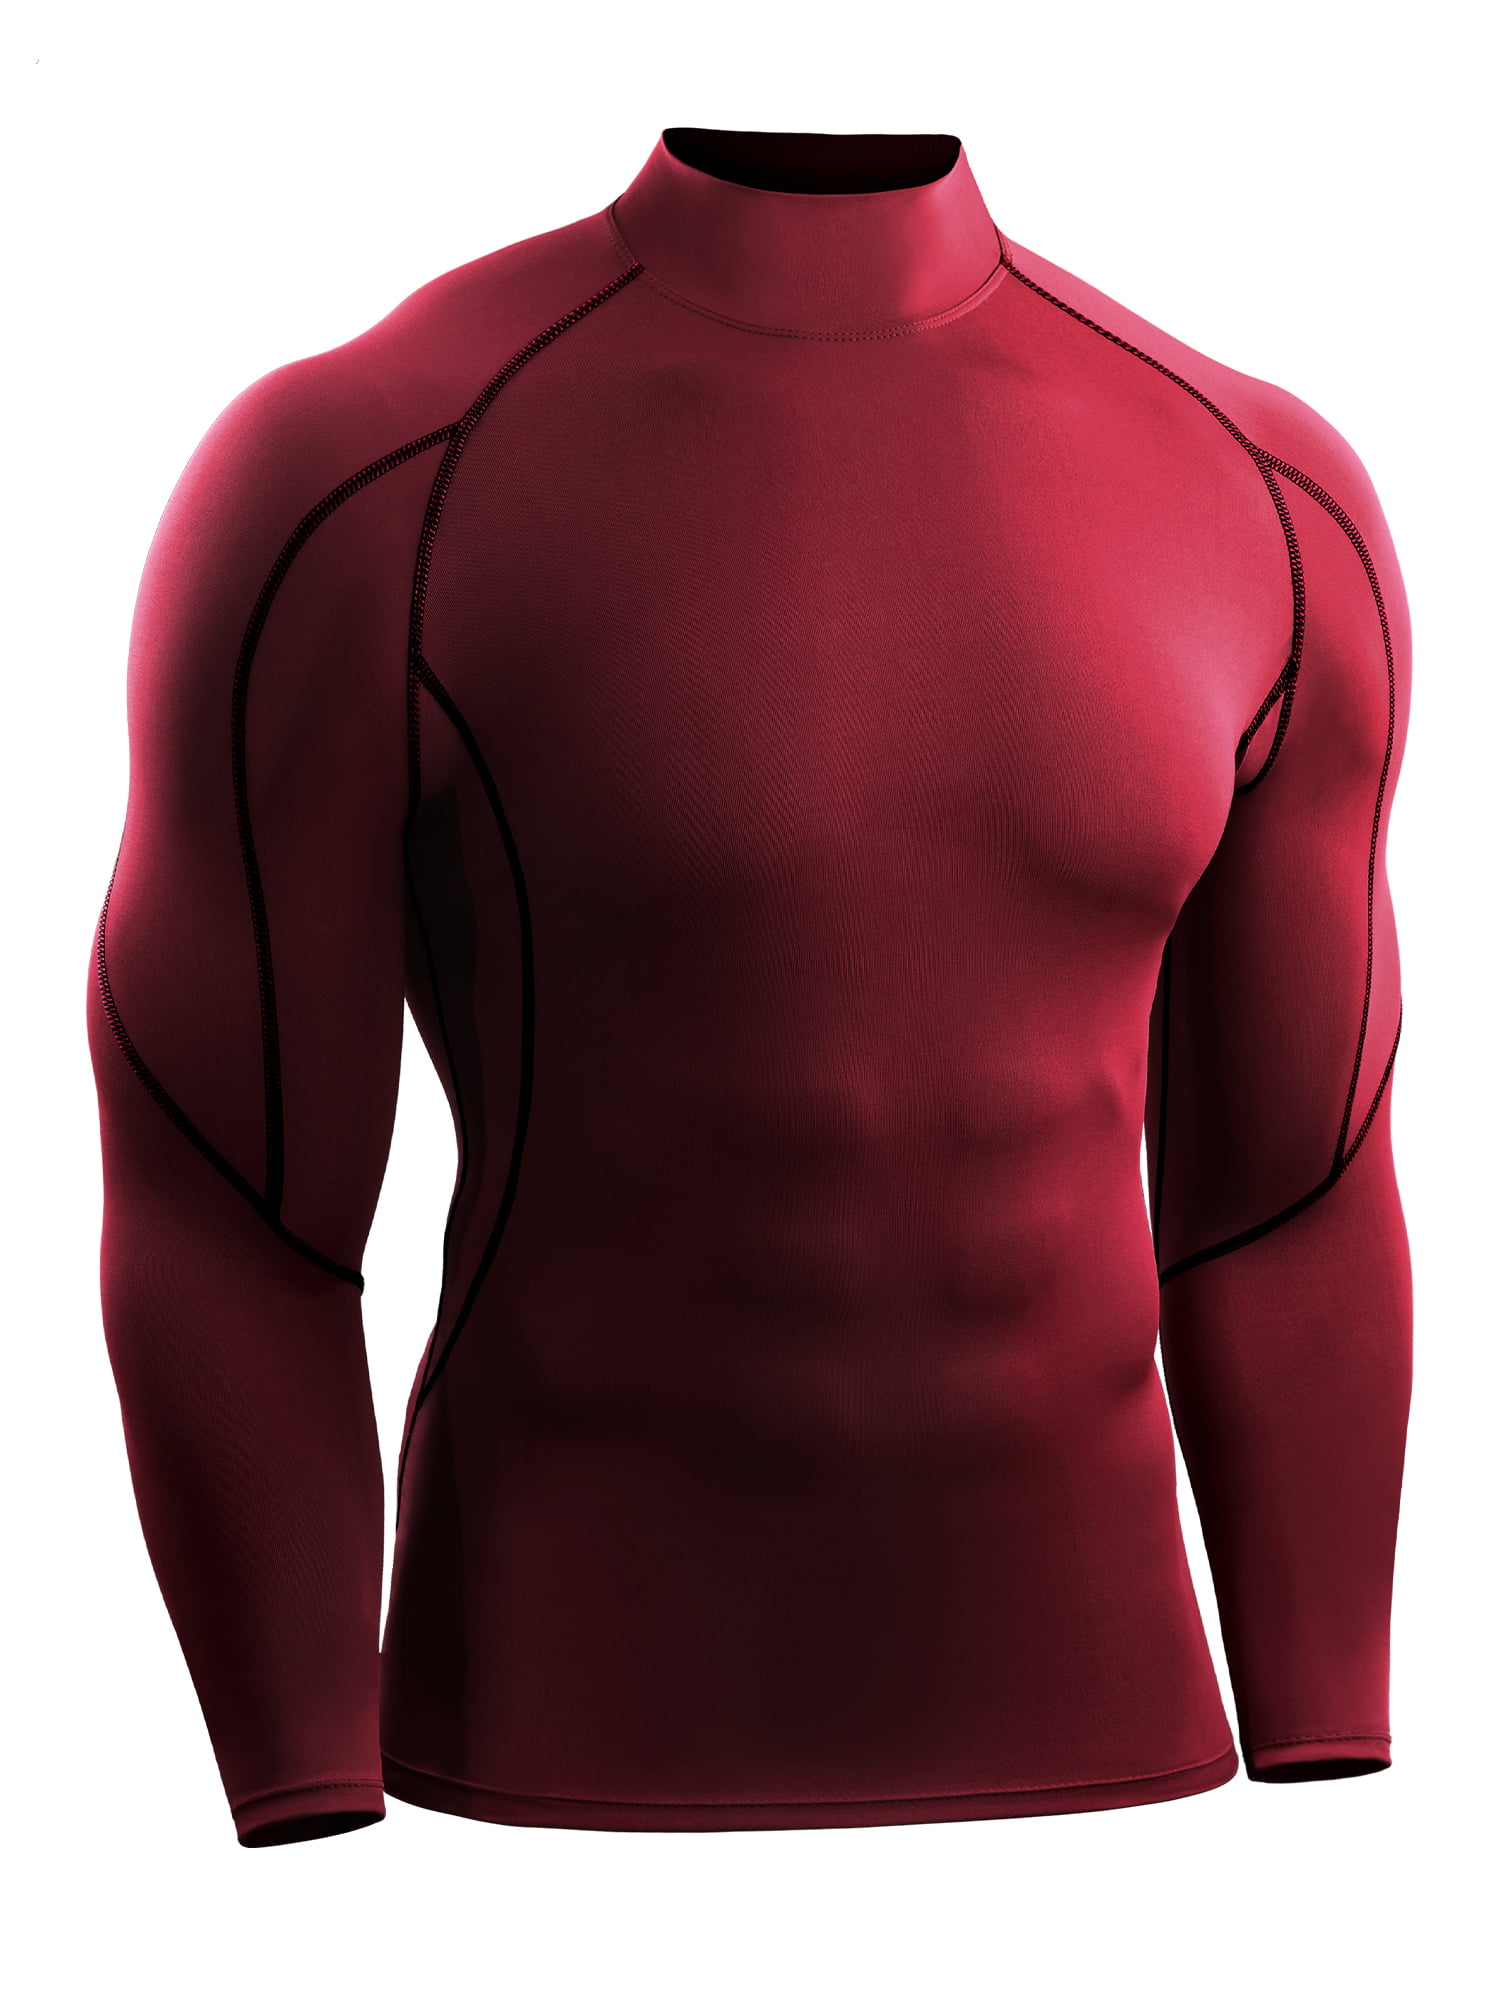 Men's Compression T Shirt Quick-dry Fitness Mock Neck Tops Spandex Long Sleeve 